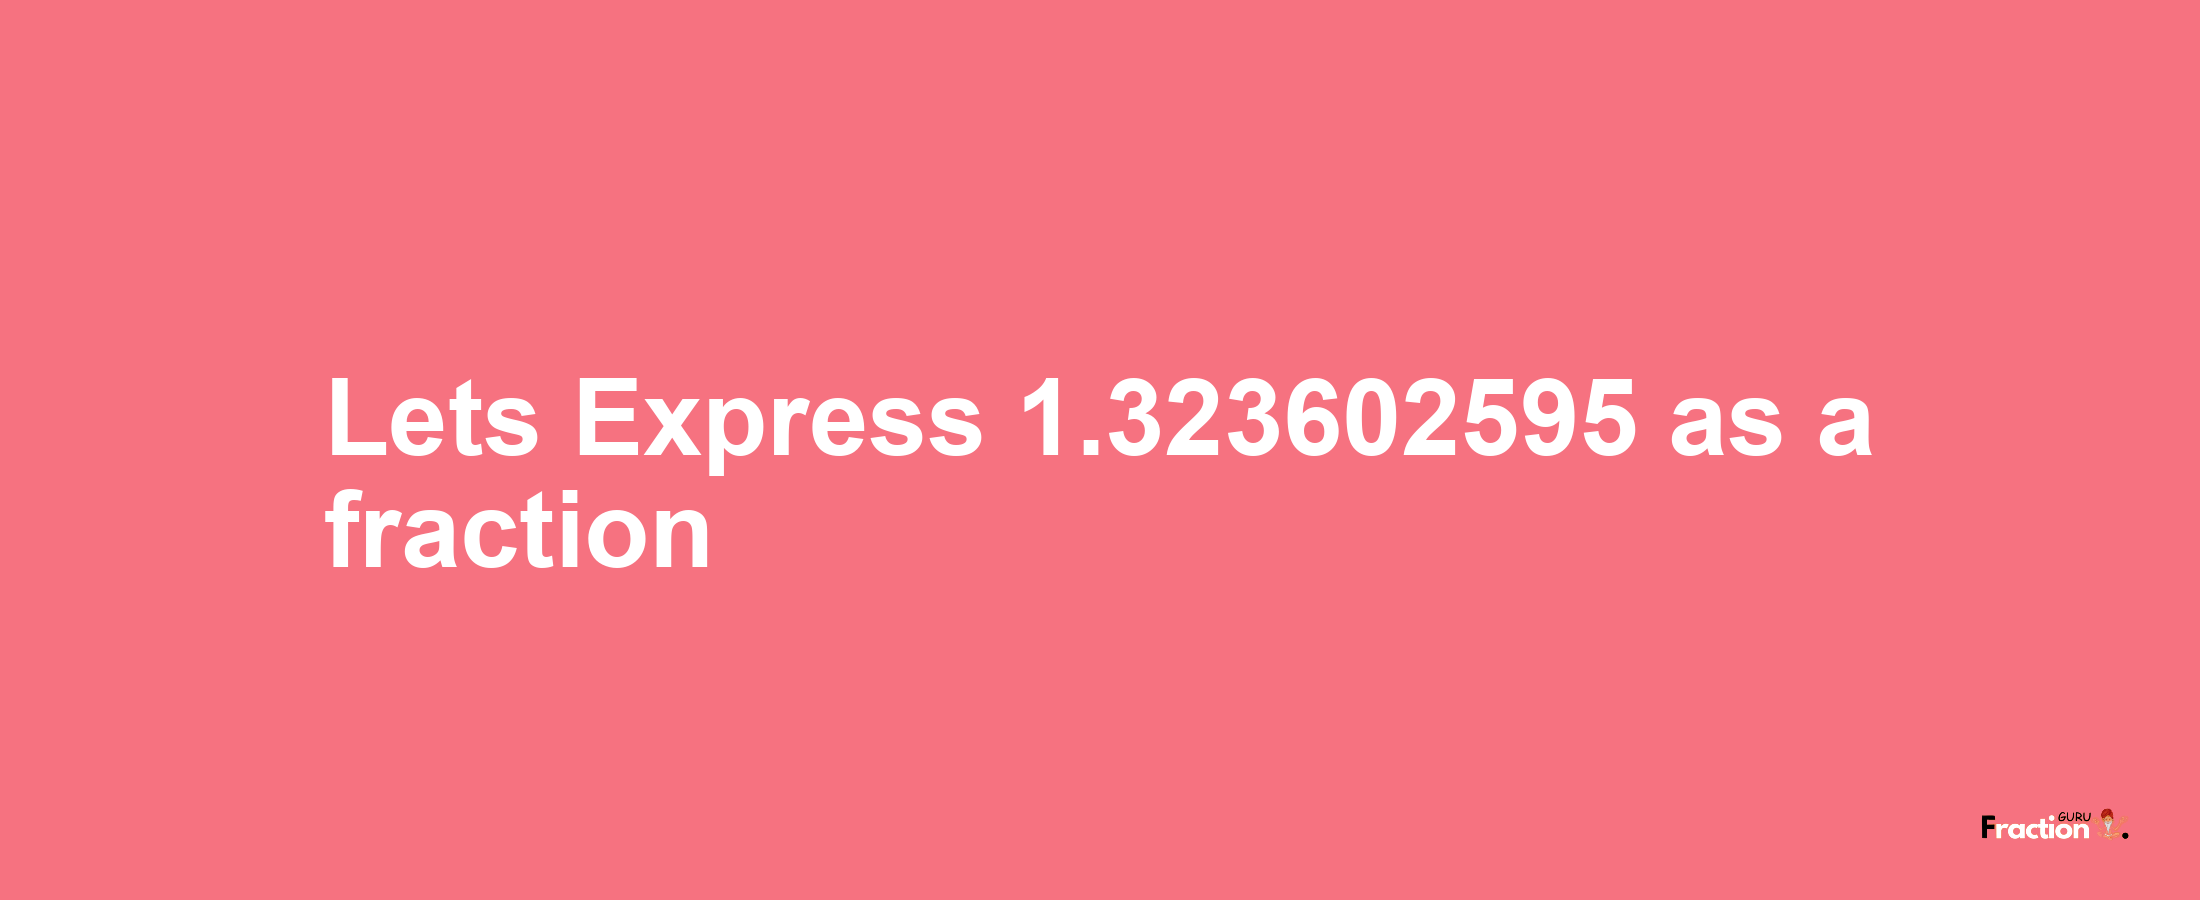 Lets Express 1.323602595 as afraction